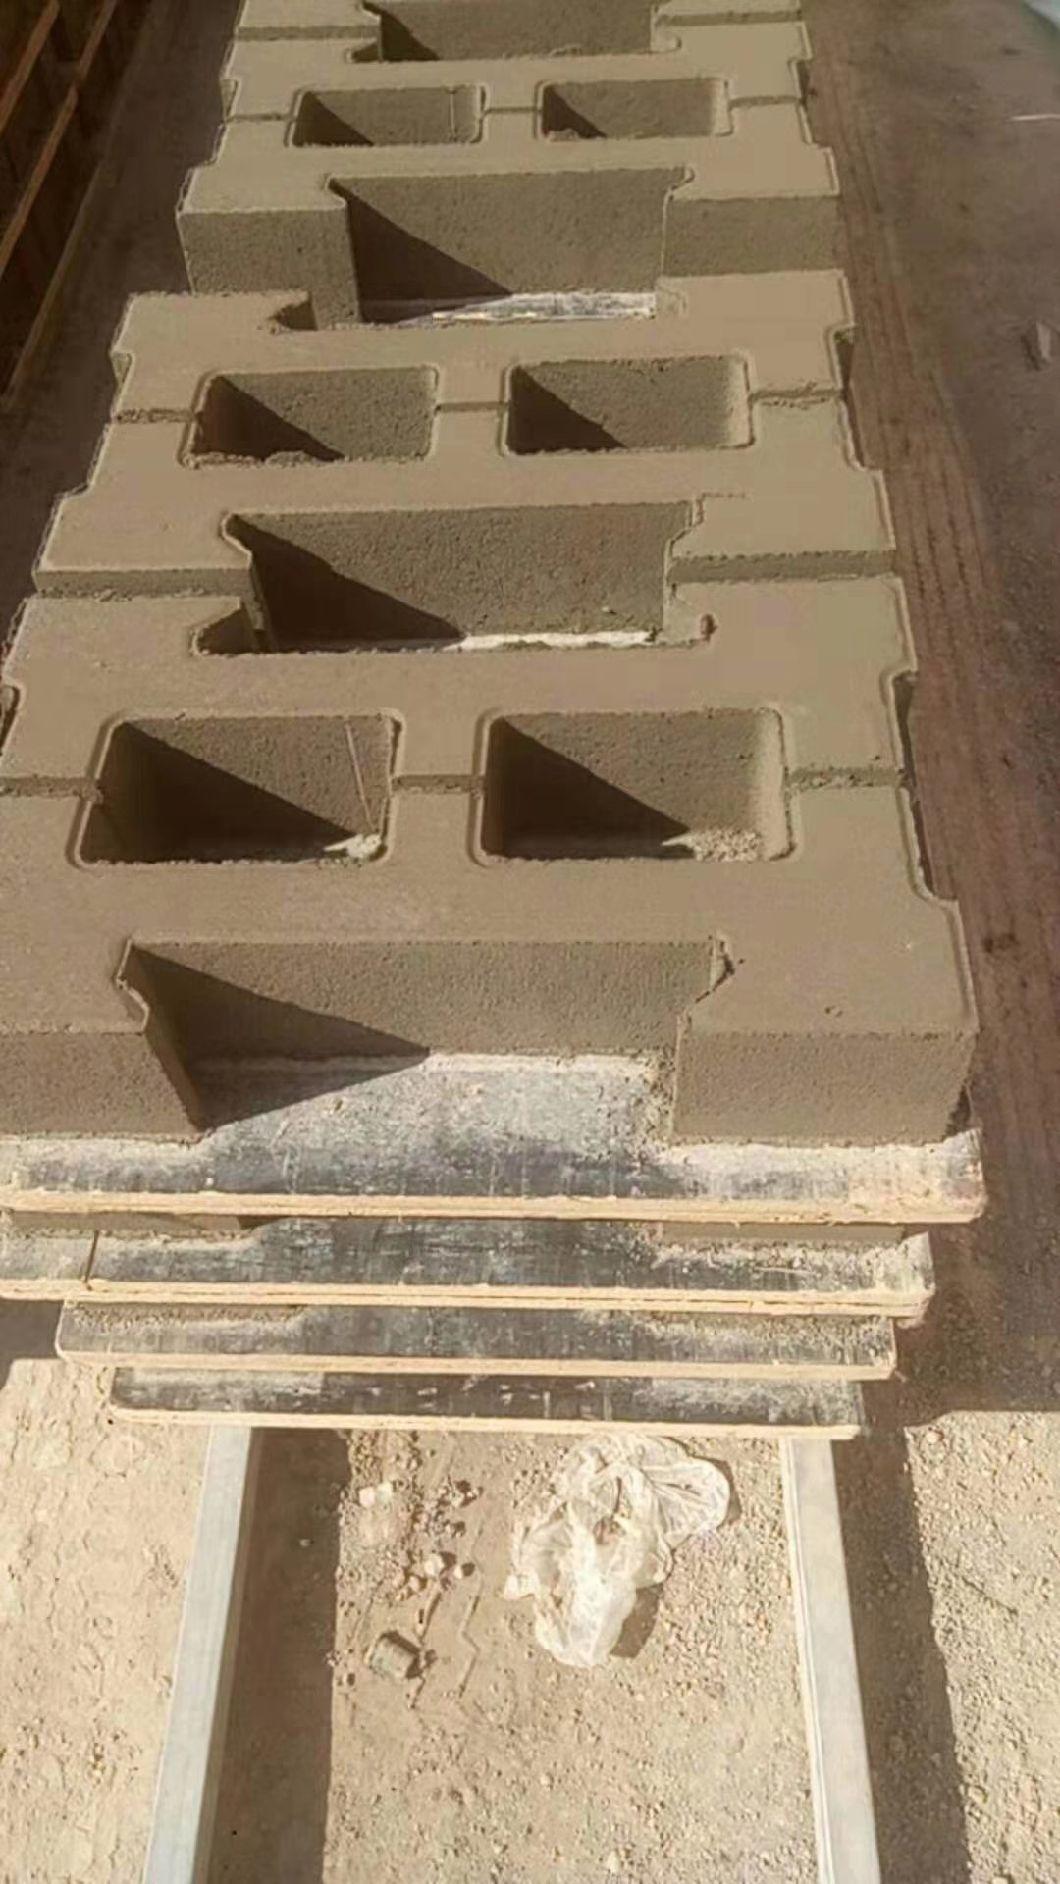 Our Price Is Always The Most Suitable for The Market Garden Brick Making Equipment